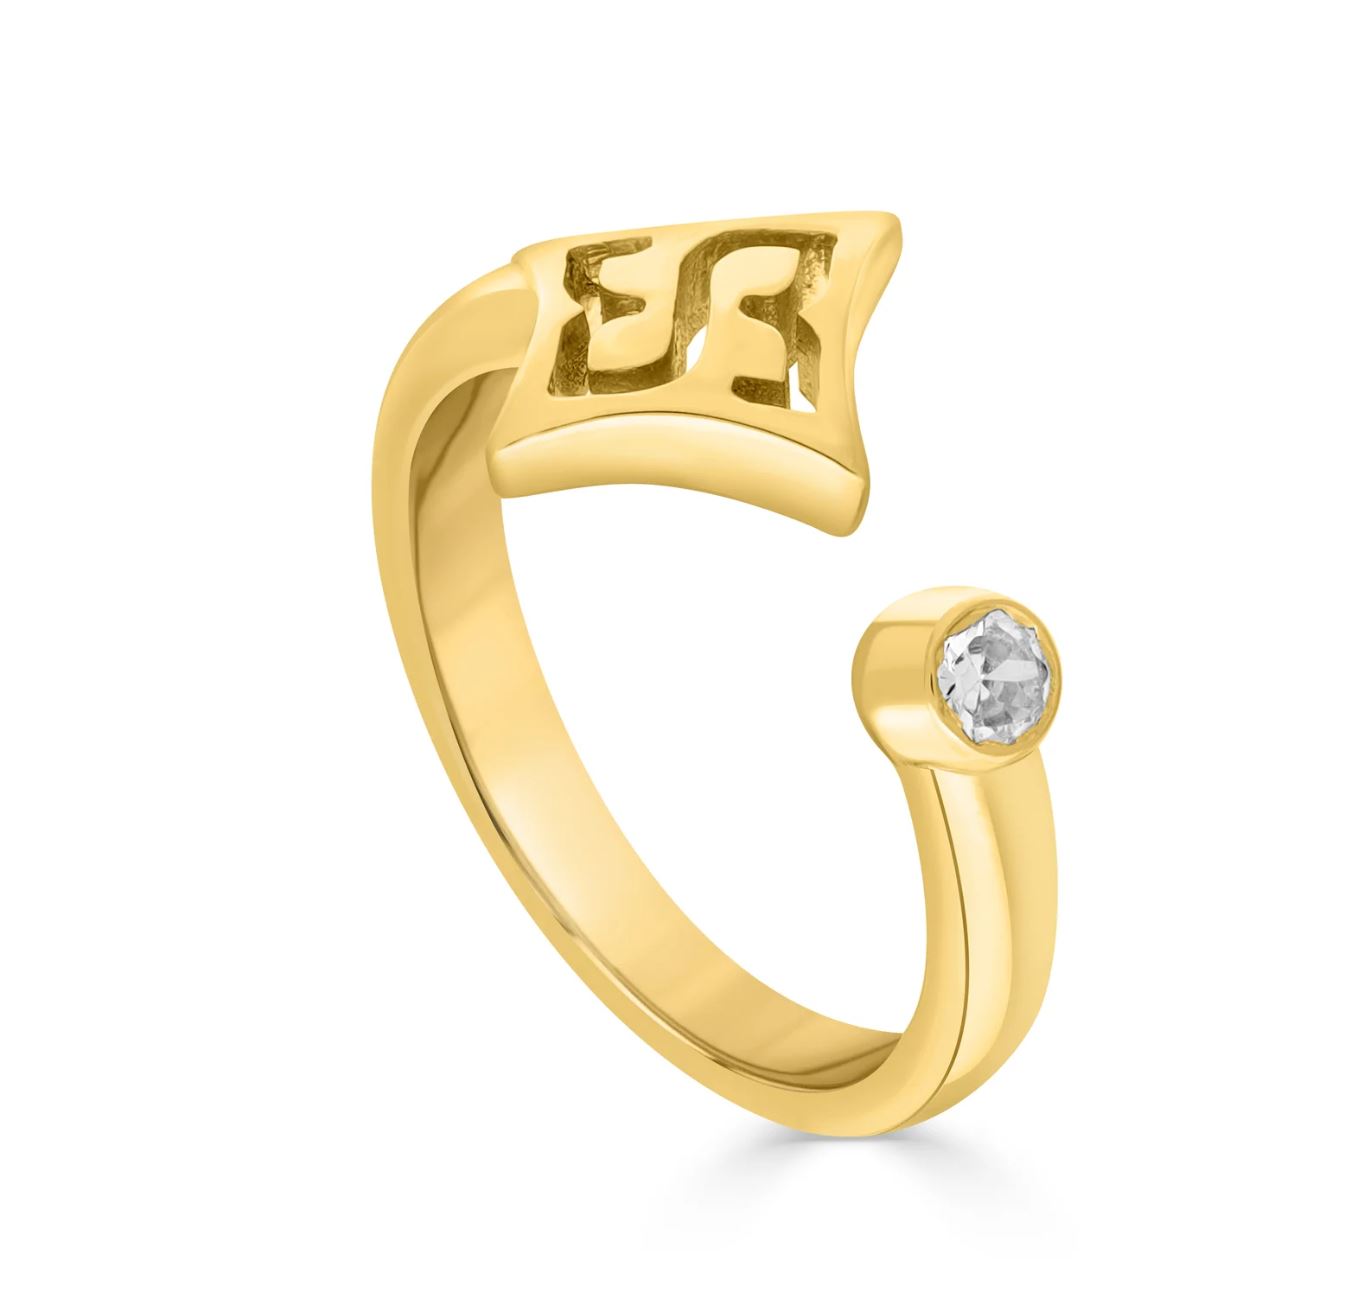 Gold Motif Ring From Le Soleil